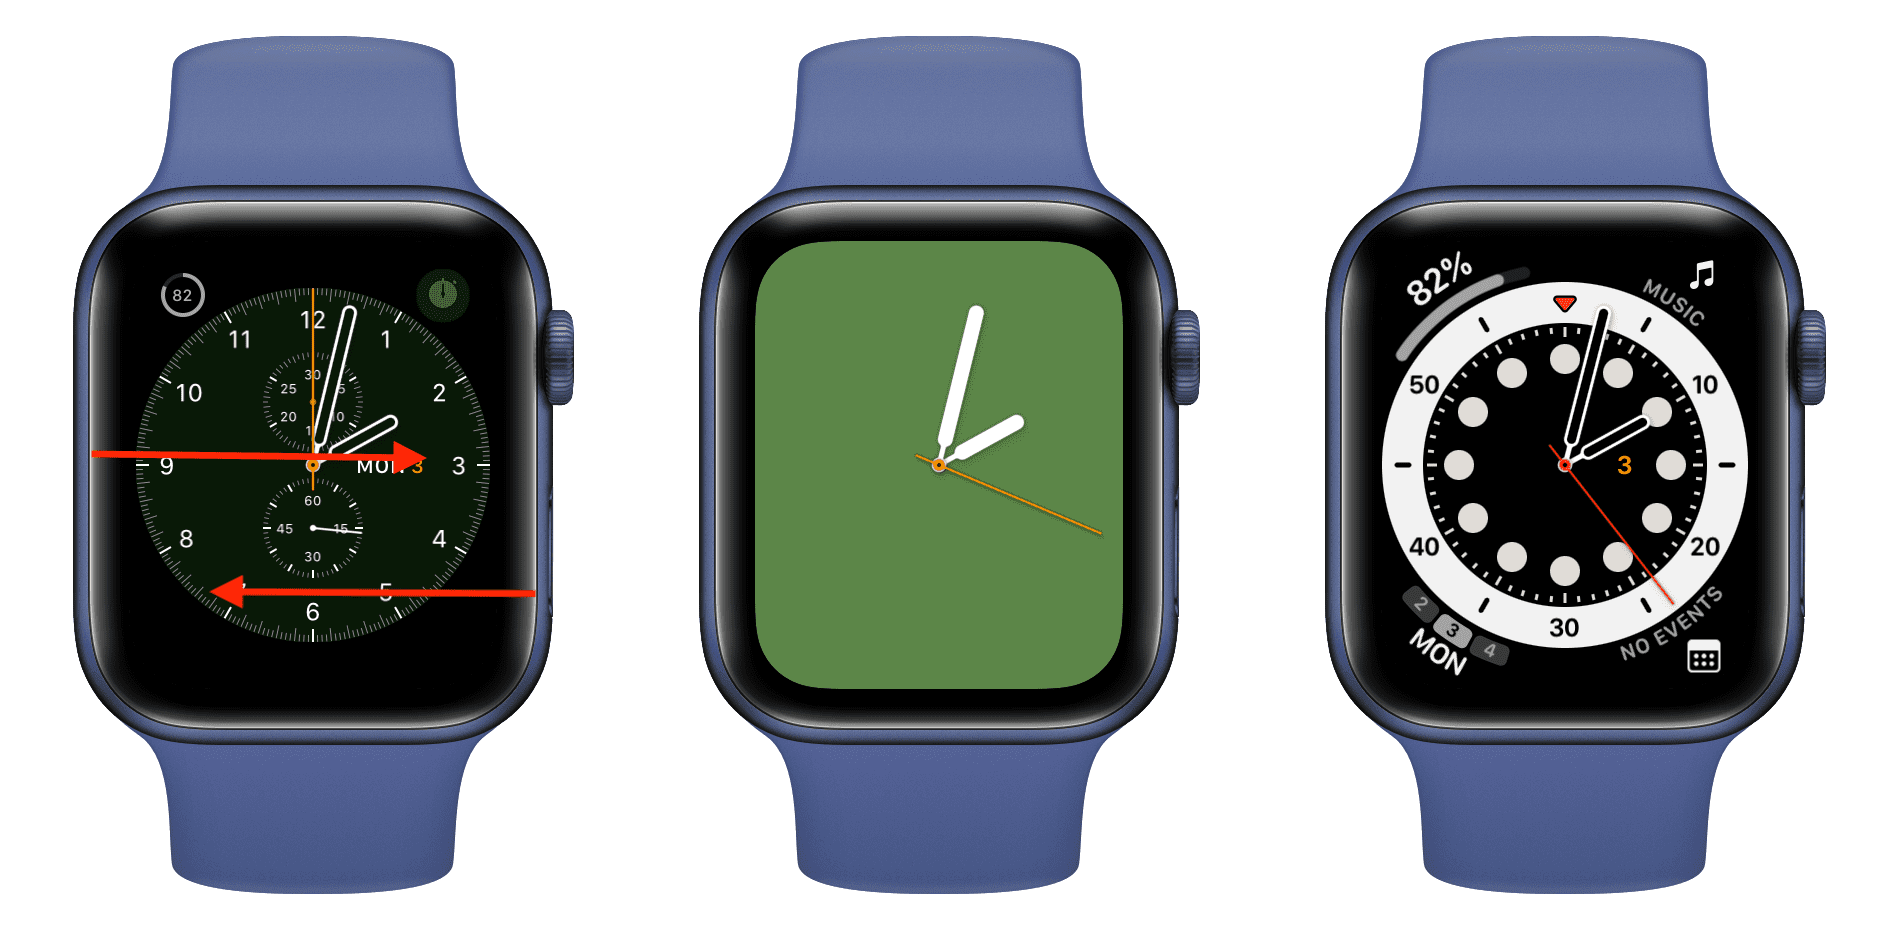 Swipe on current watch face to change it